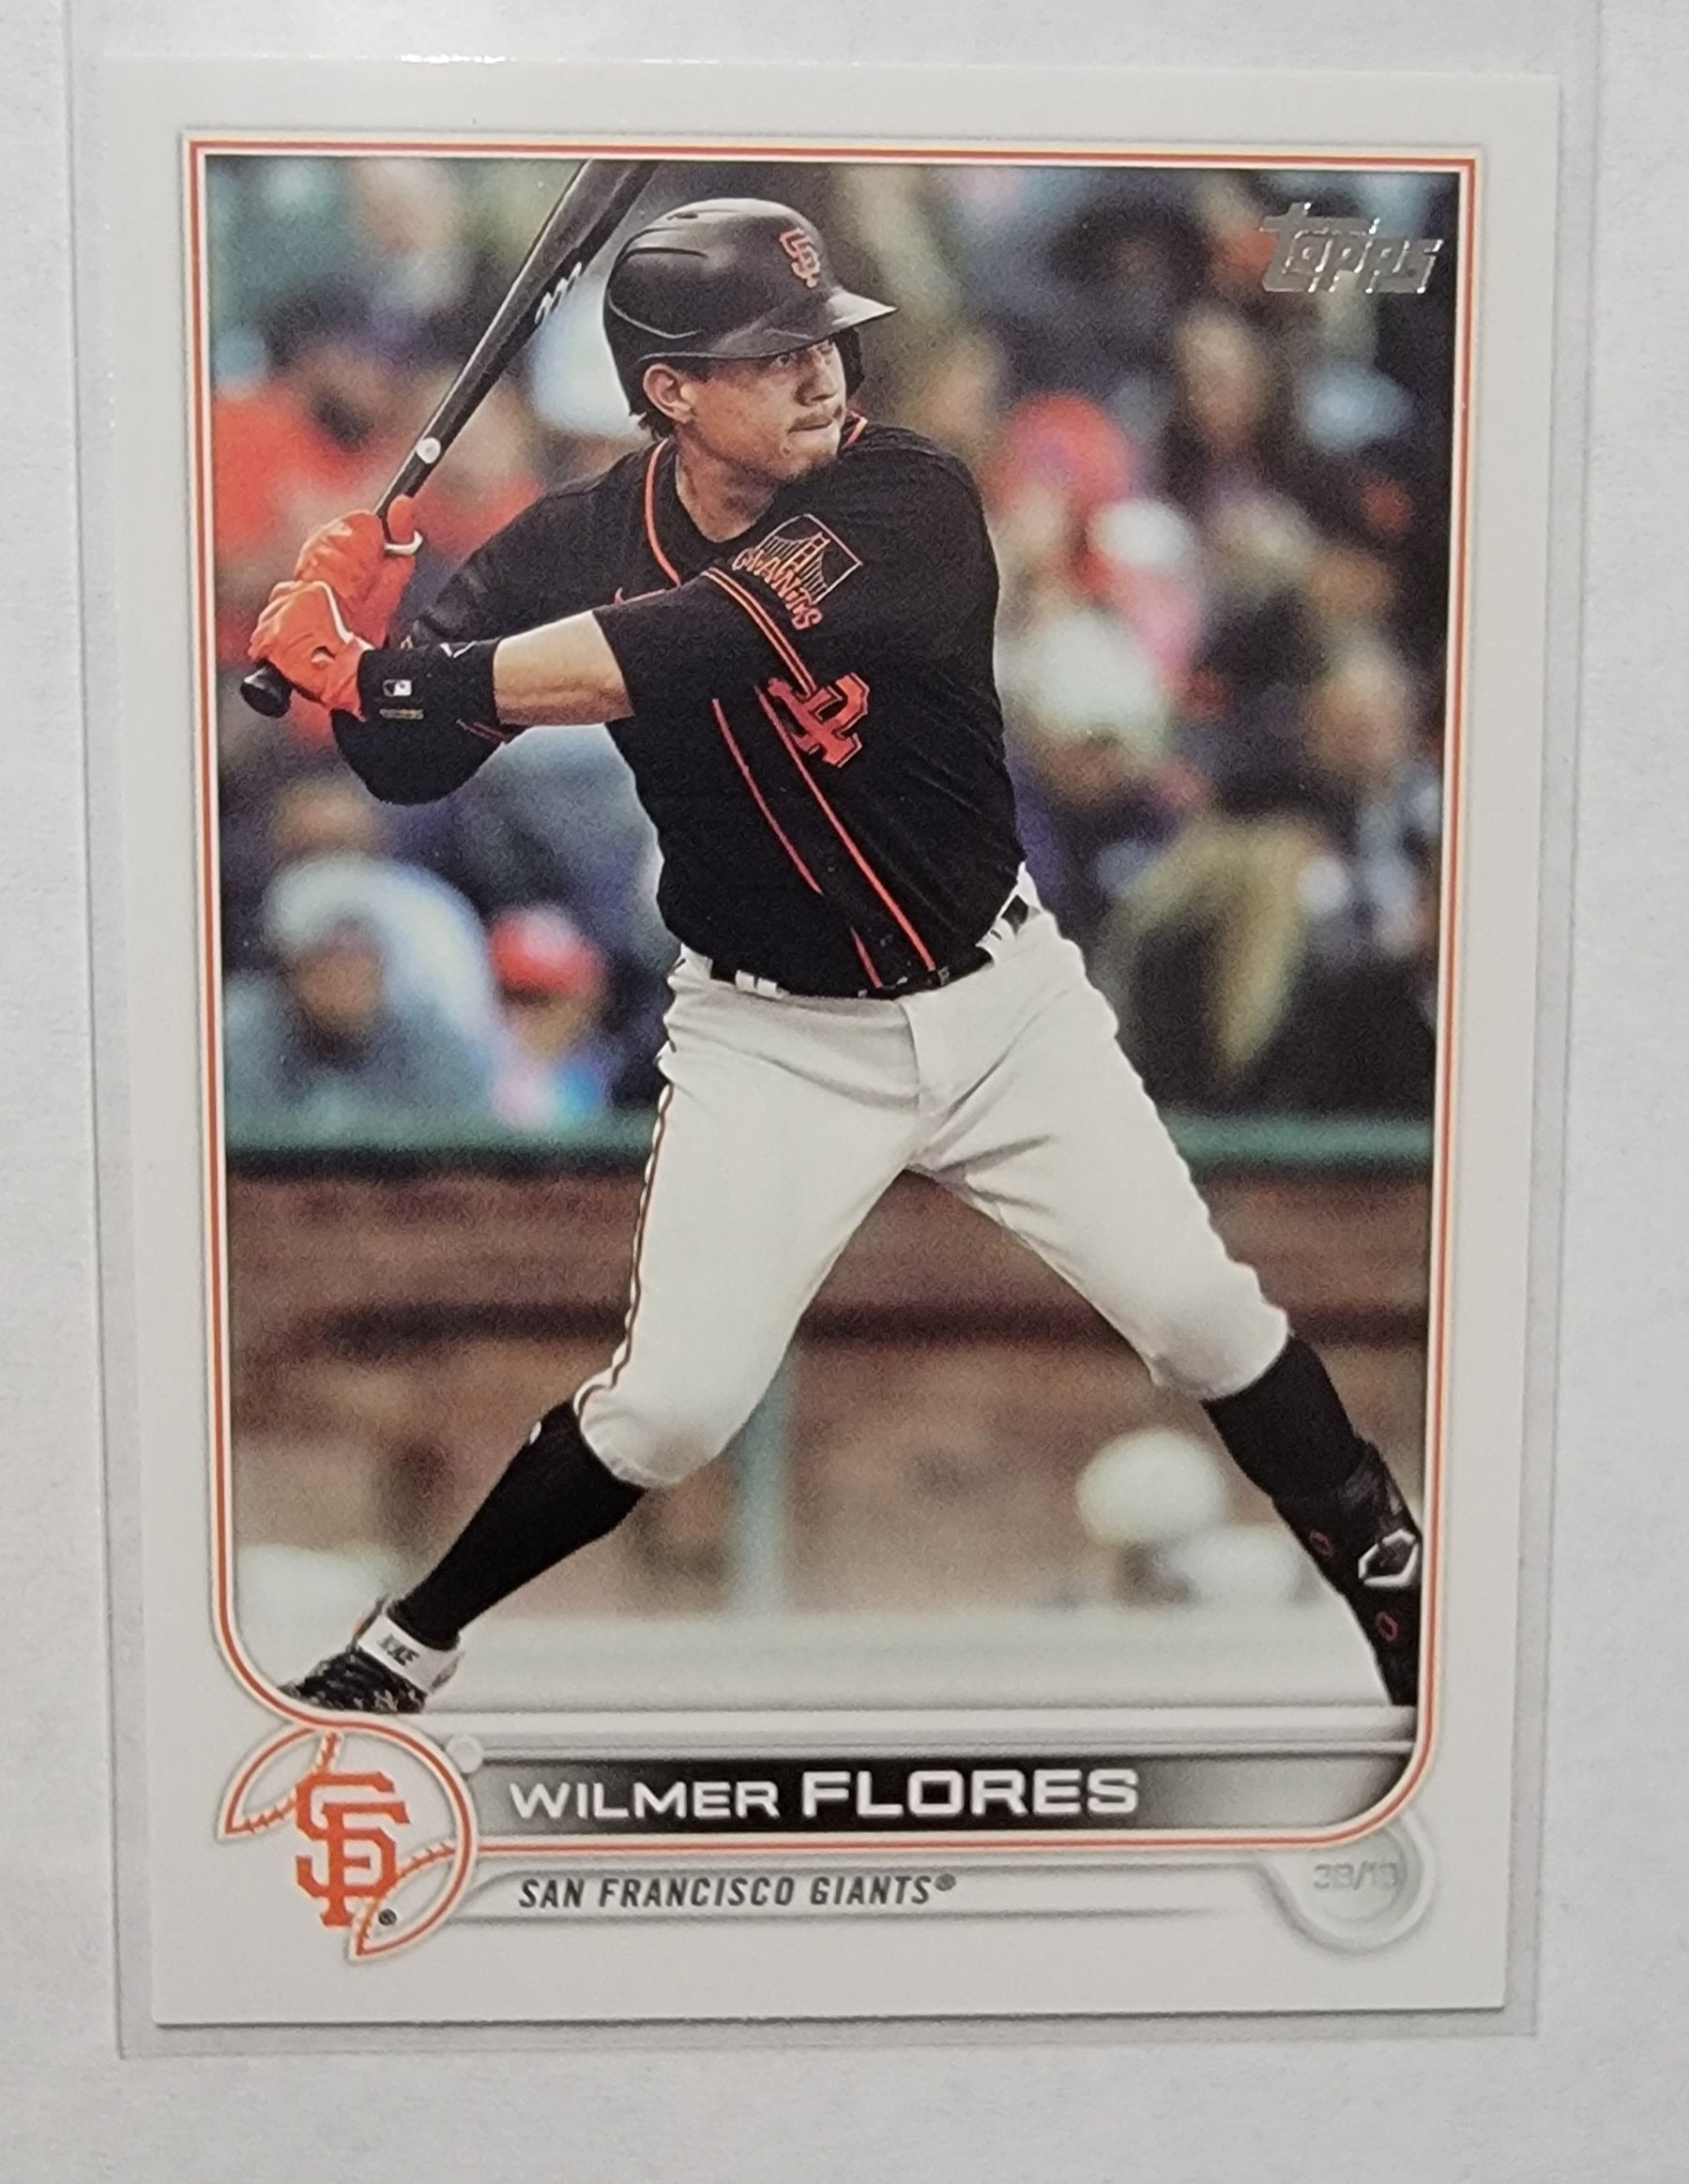 2022 Topps Series 2 Wilmer Flores Baseball Card AVM1 simple Xclusive Collectibles   